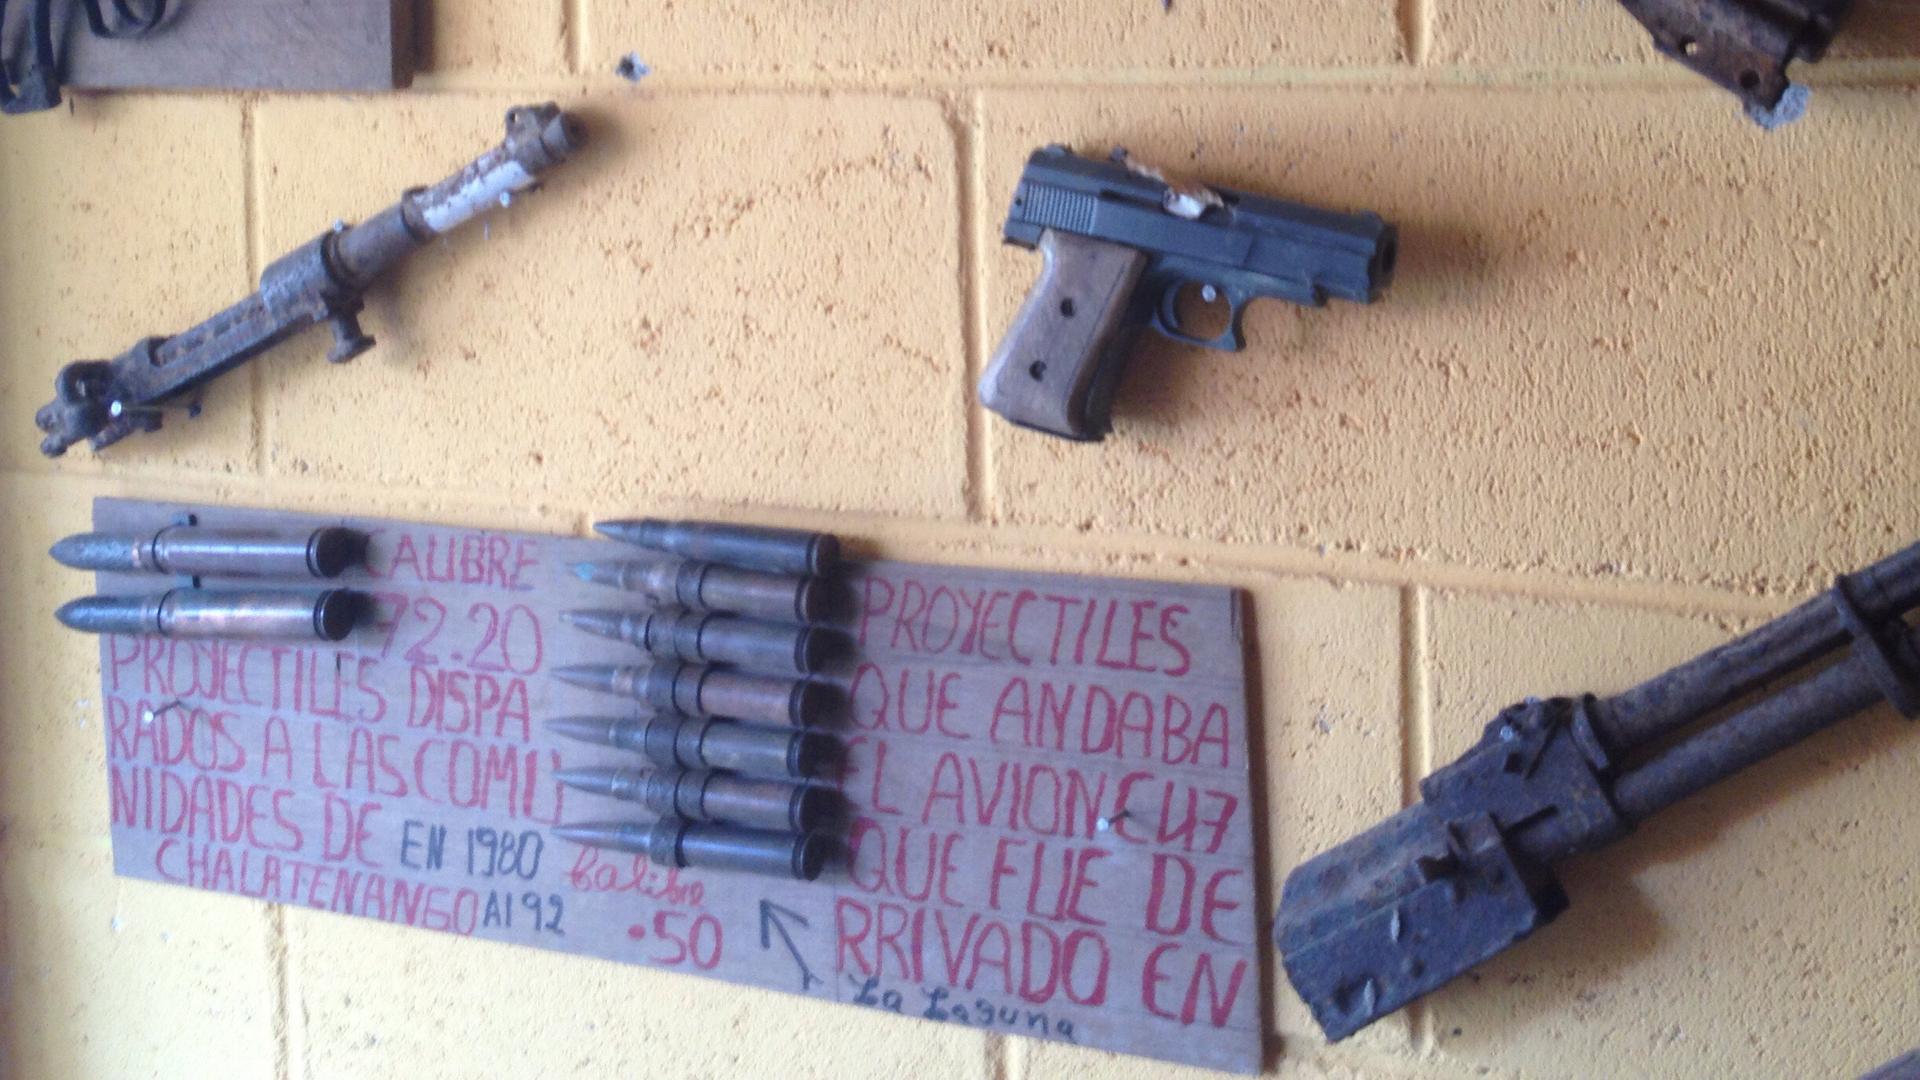 The town of Las Vueltas has almost no murders, but it does have a museum collection of guns and AK-47s that date back to El Salvador's civil war.